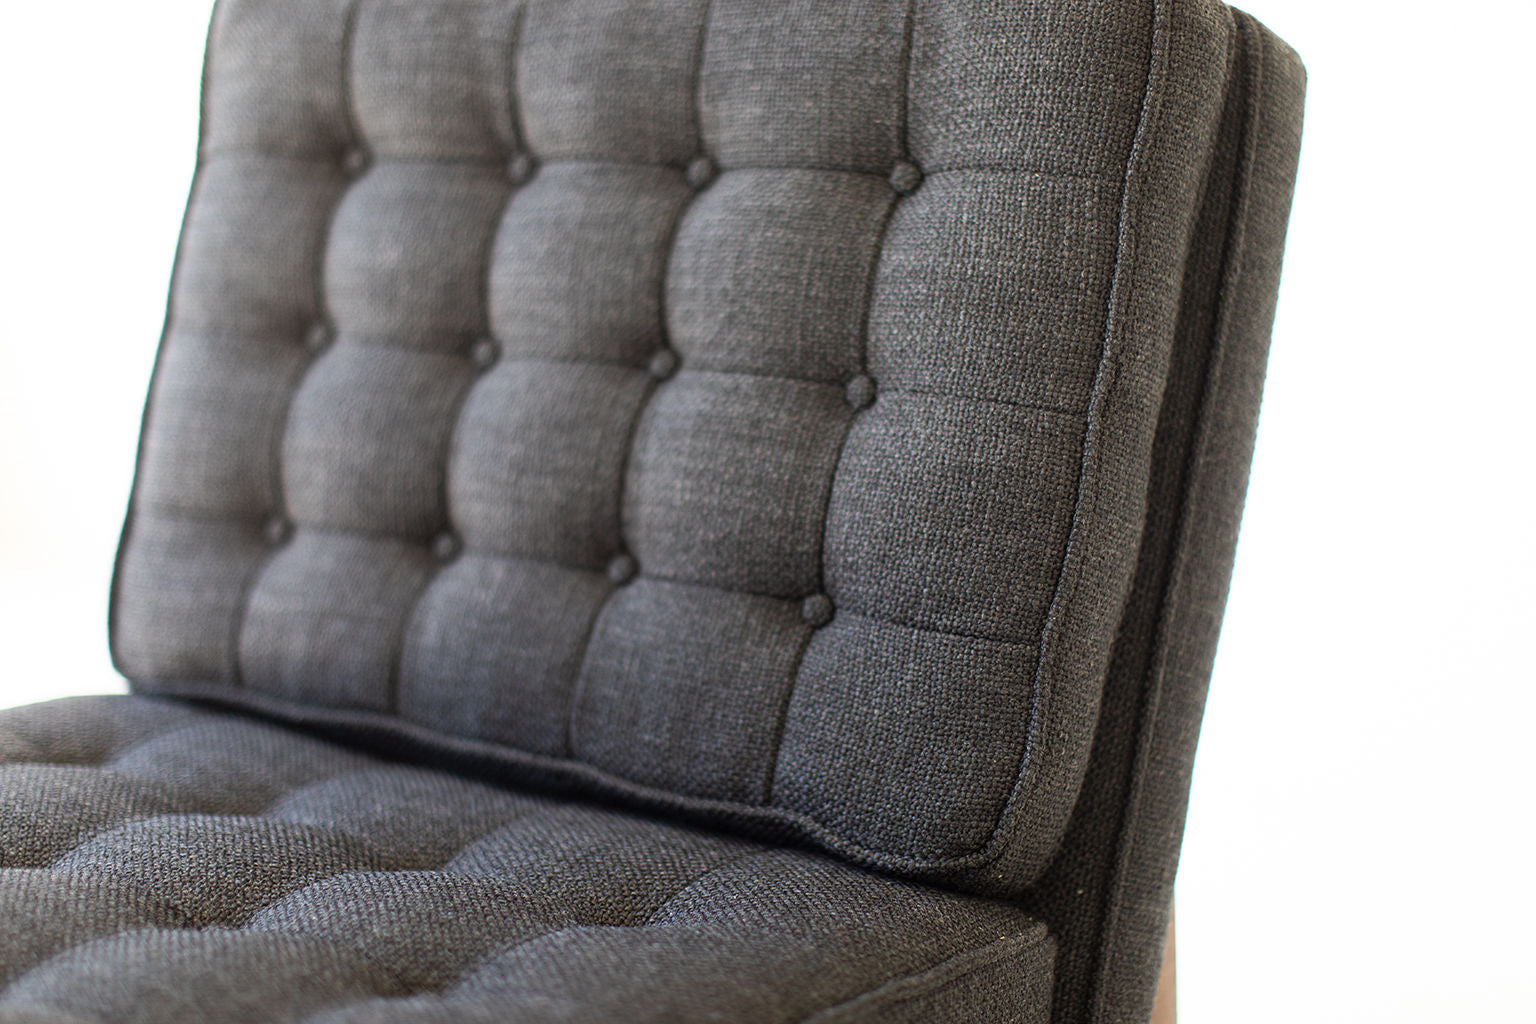 Jack Cartwright Slipper Chair for Founders Furniture